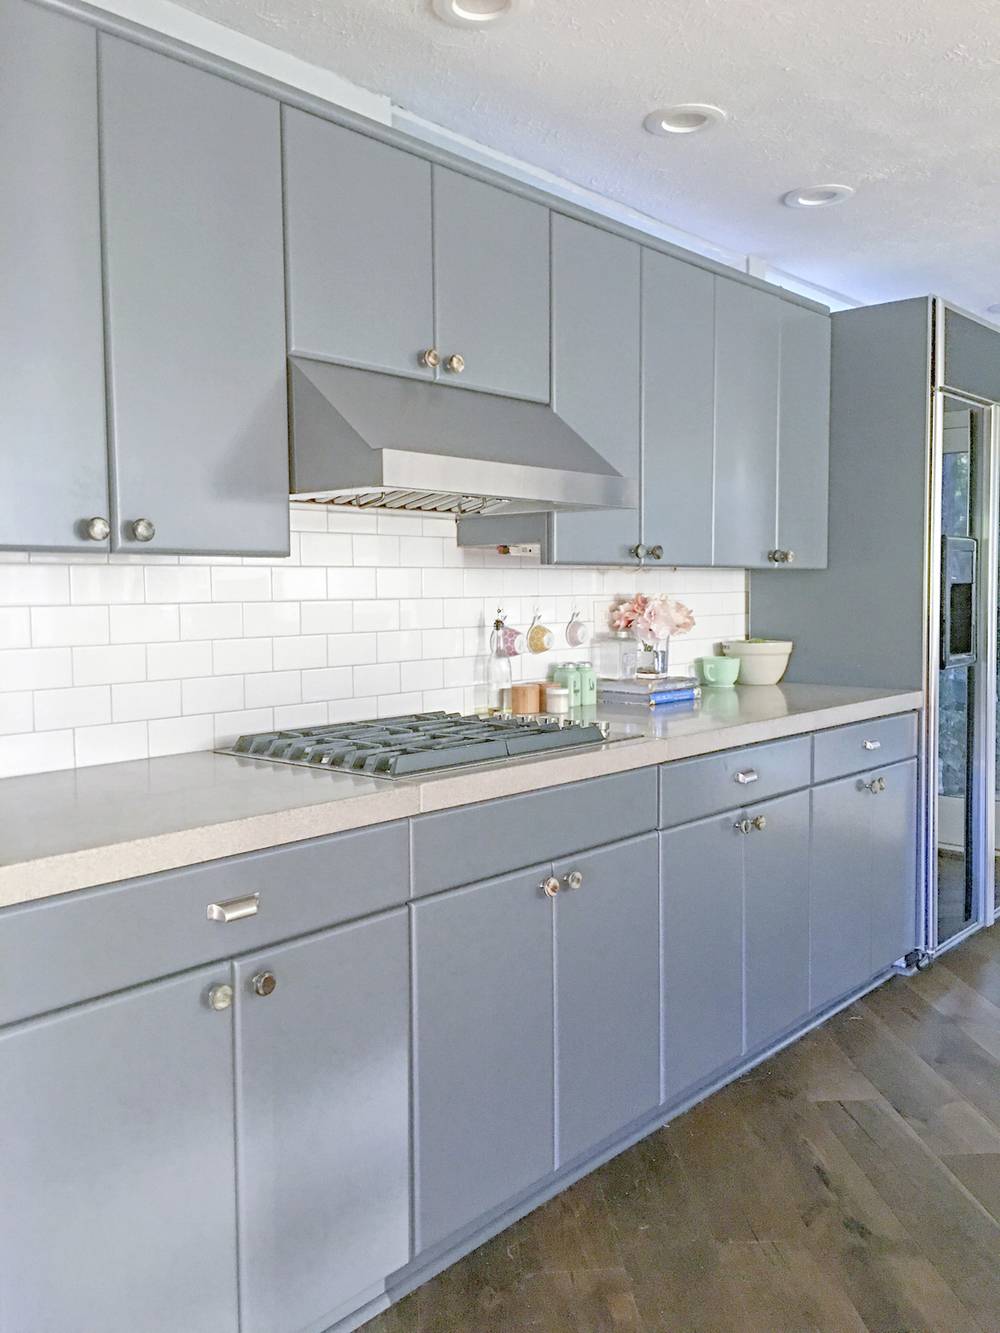 Before and After: A Dated Kitchen Gets A Makeover